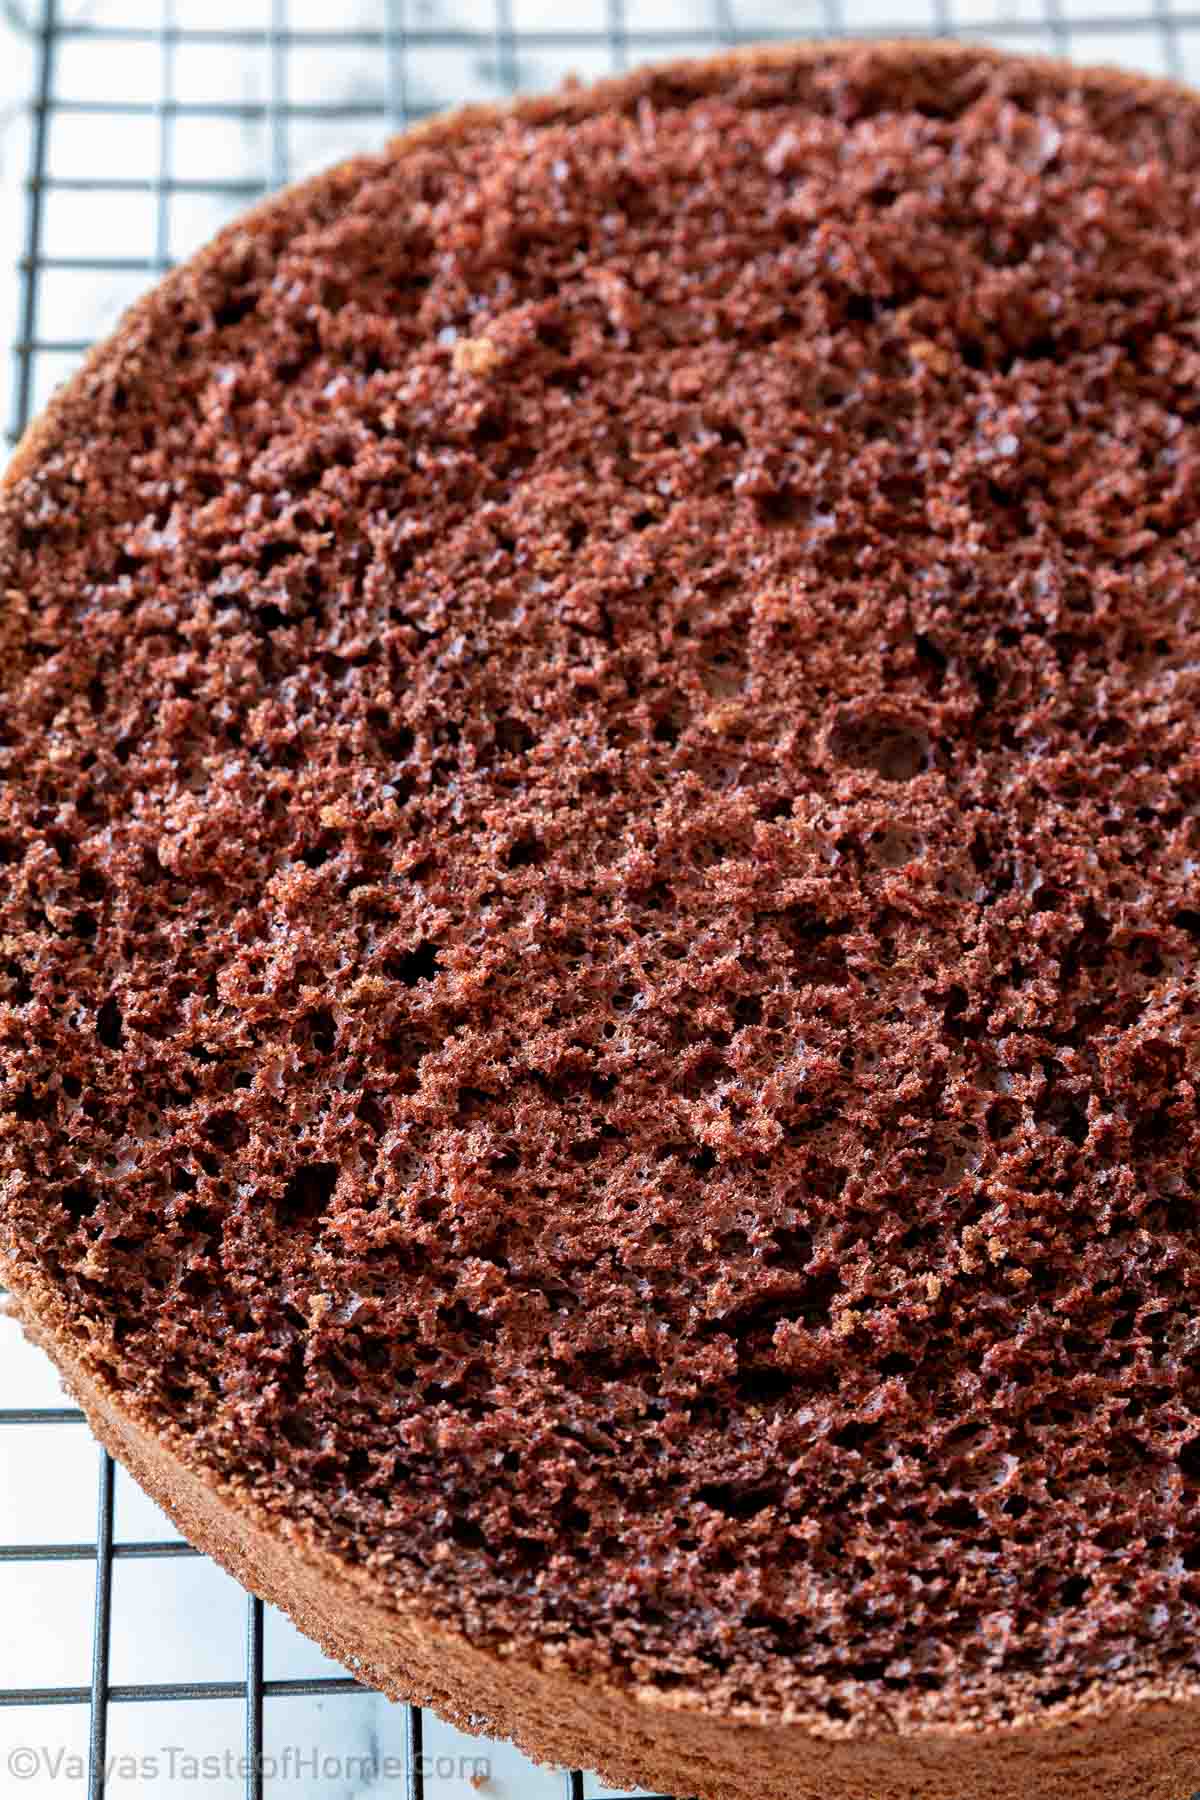 The Best Chocolate Sponge Cake is light and airy, moist and tender, rich and chocolatey. Every chocolate-lover dream come true!